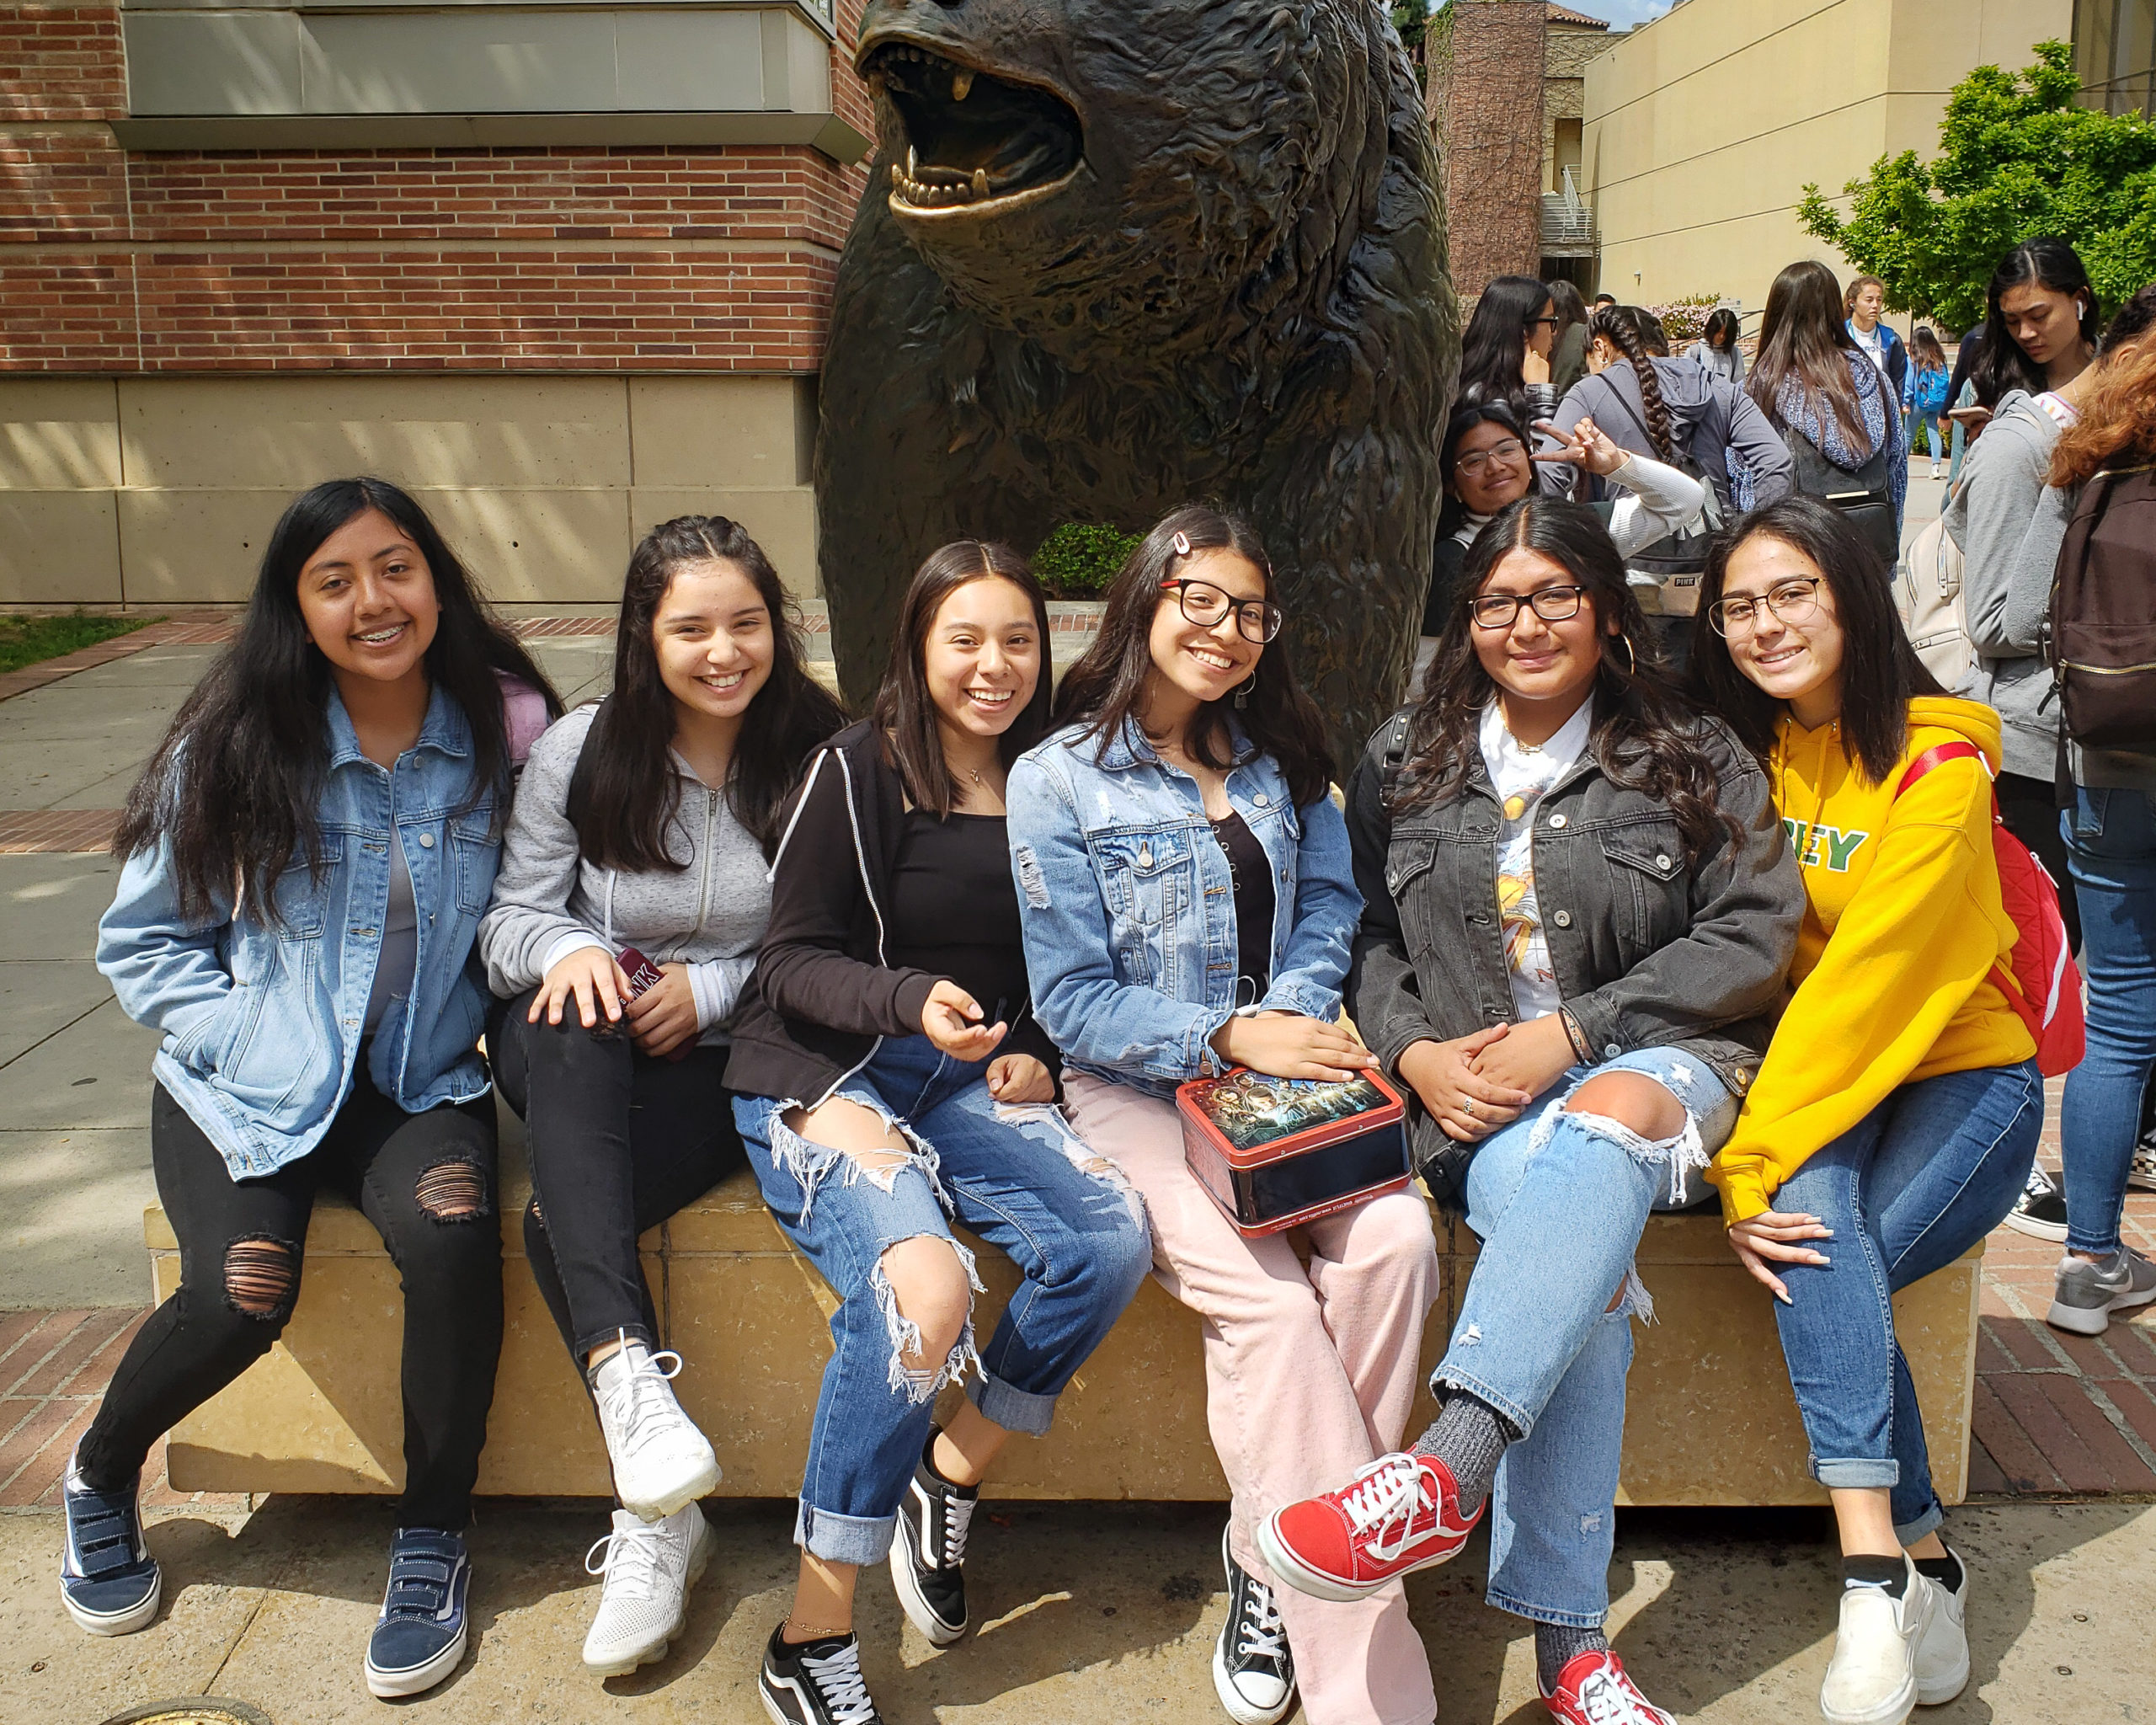 Students in front of UCLA Bear